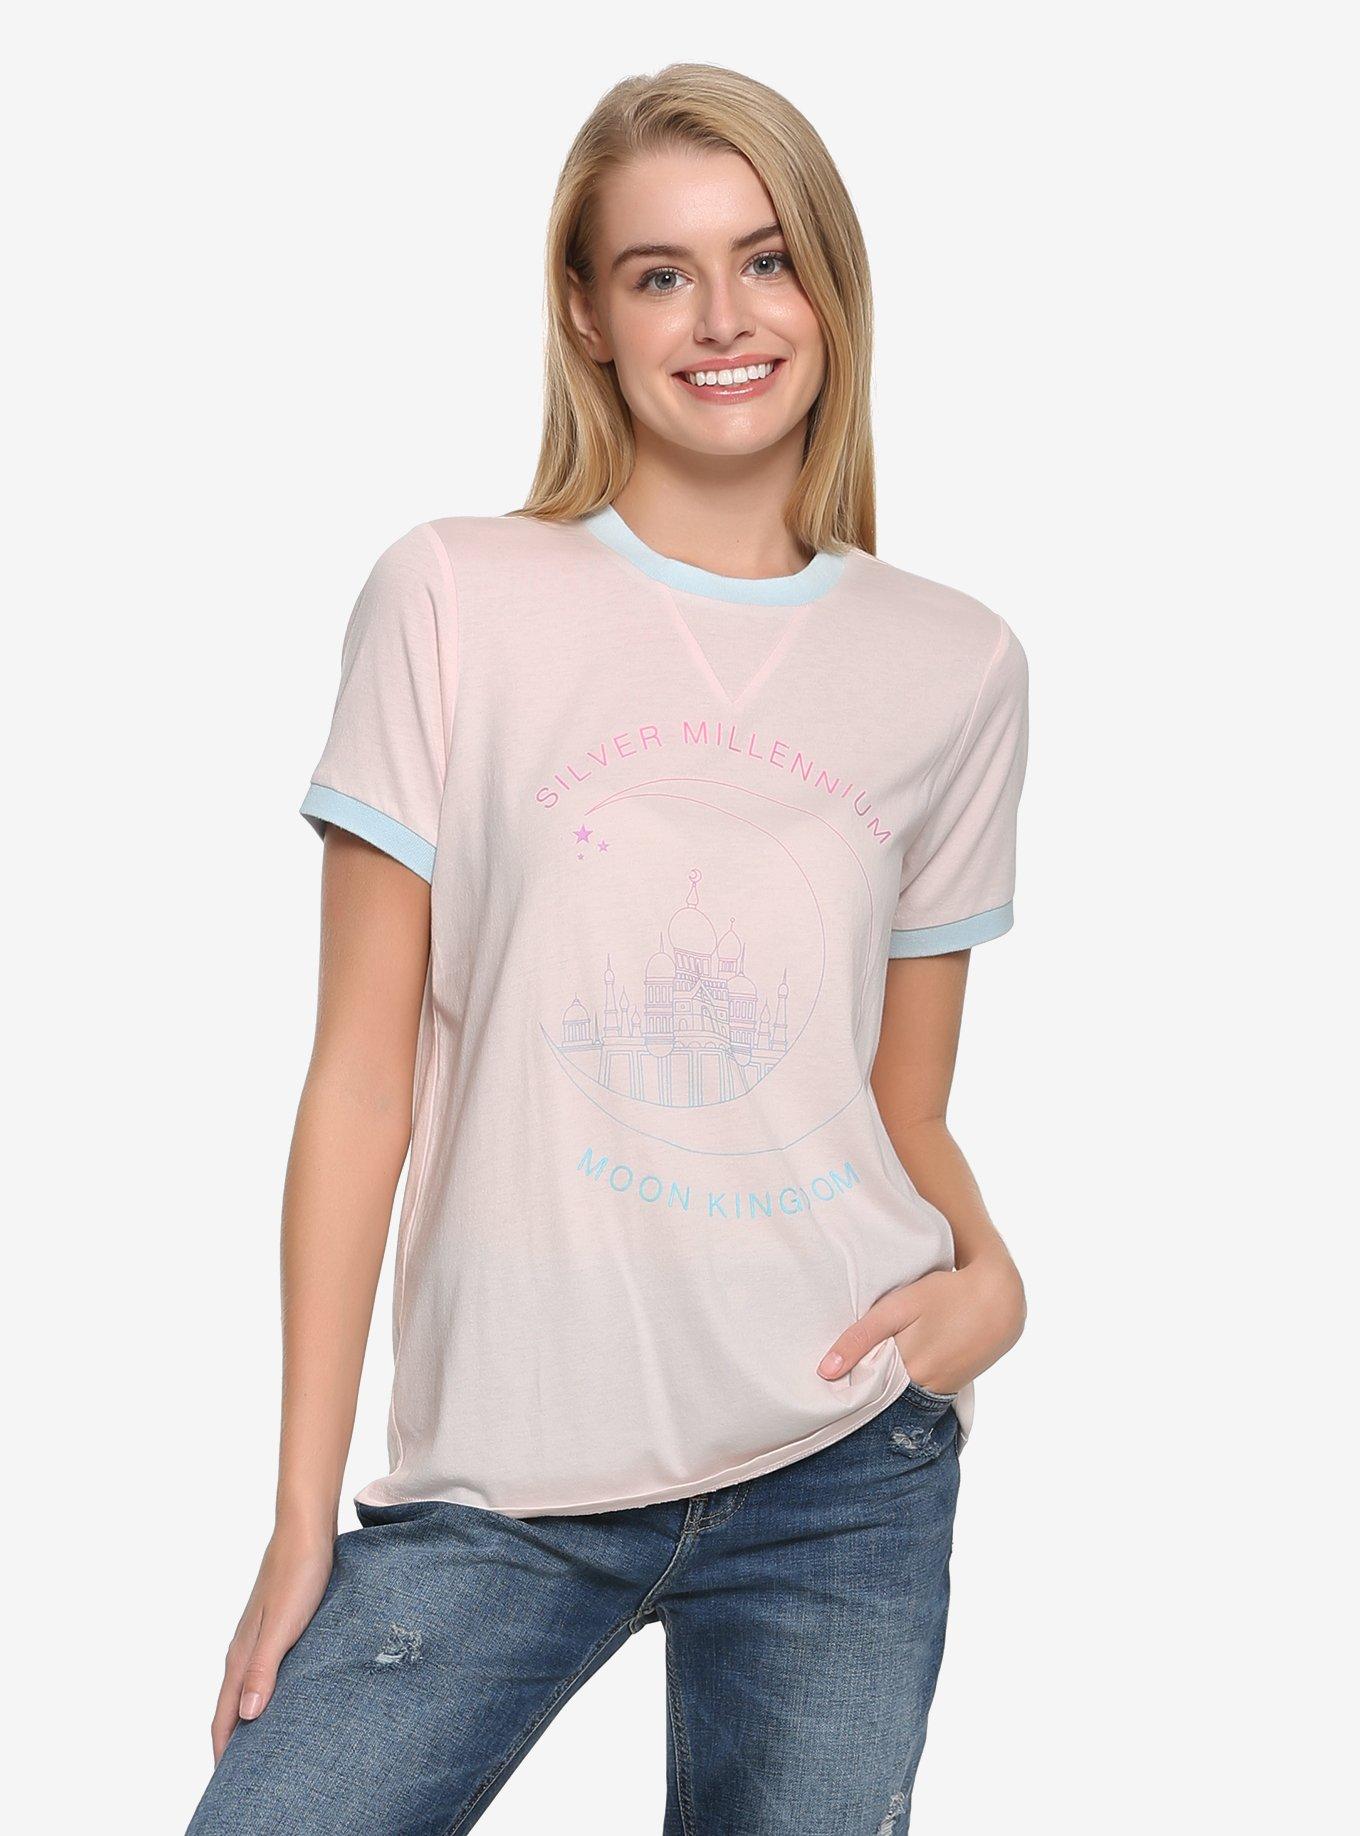 Sailor Moon Kingdom Ringer Womens T-Shirt - BoxLunch Exclusive | BoxLunch